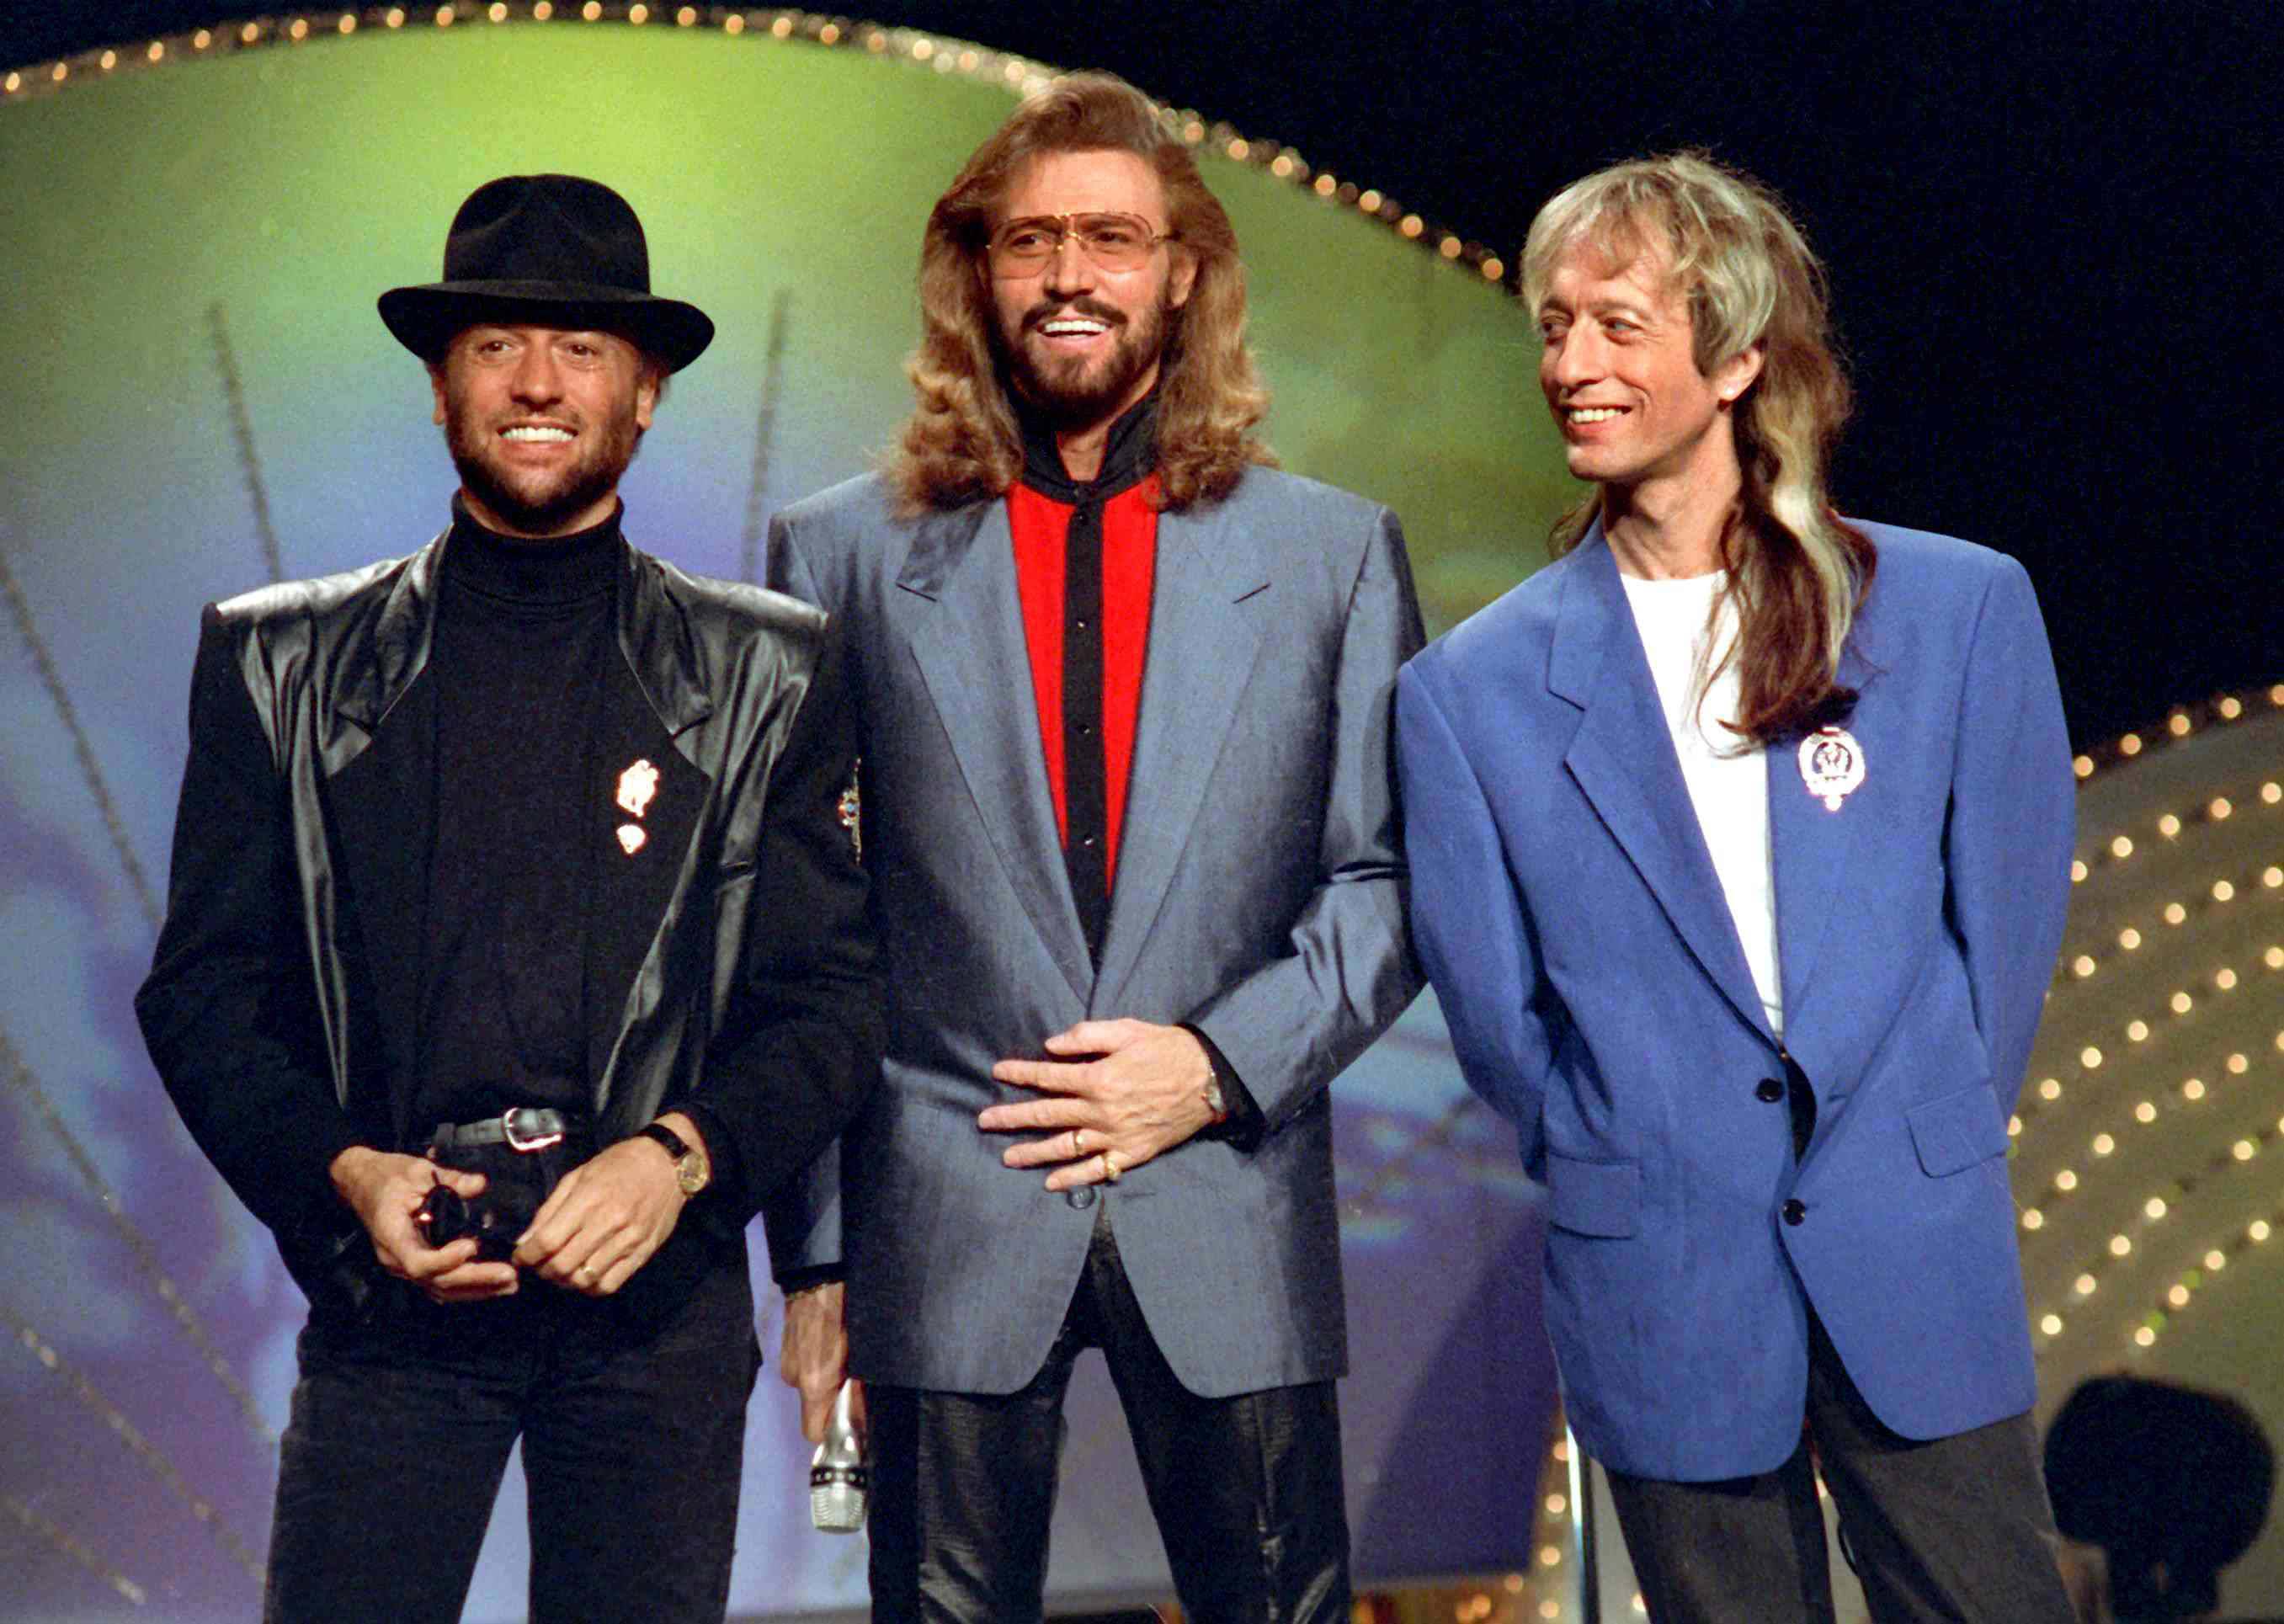 2713x1929px 1166347 Bee Gees 342.04 KB